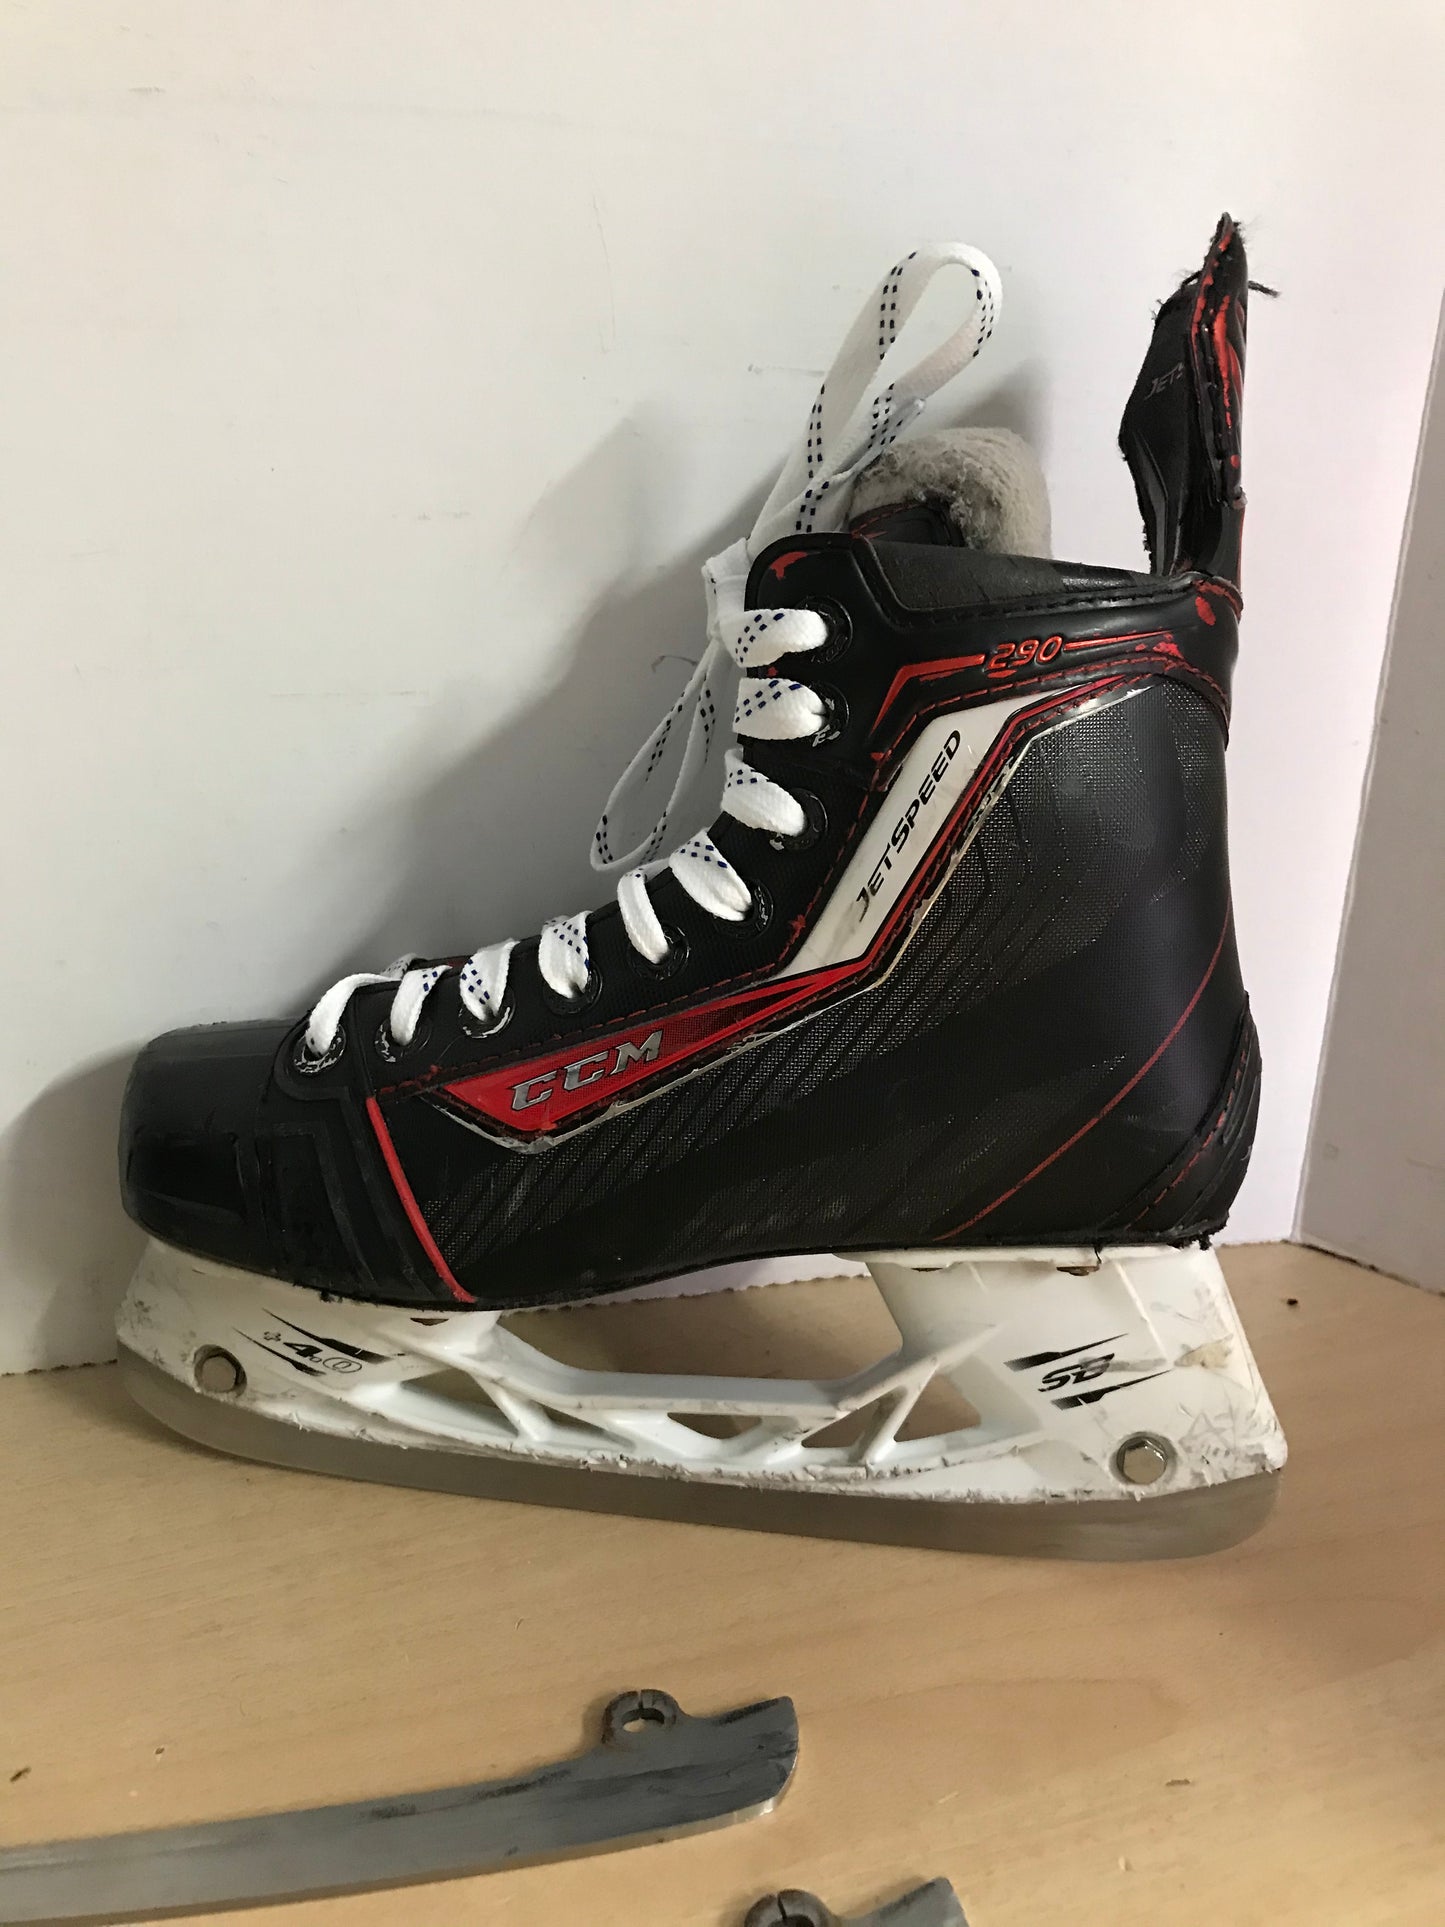 Hockey Skates Child Size 4.5 Shoe Size CCM Jetspeed 4.0 With Extra Blades Some Wear and Scratches